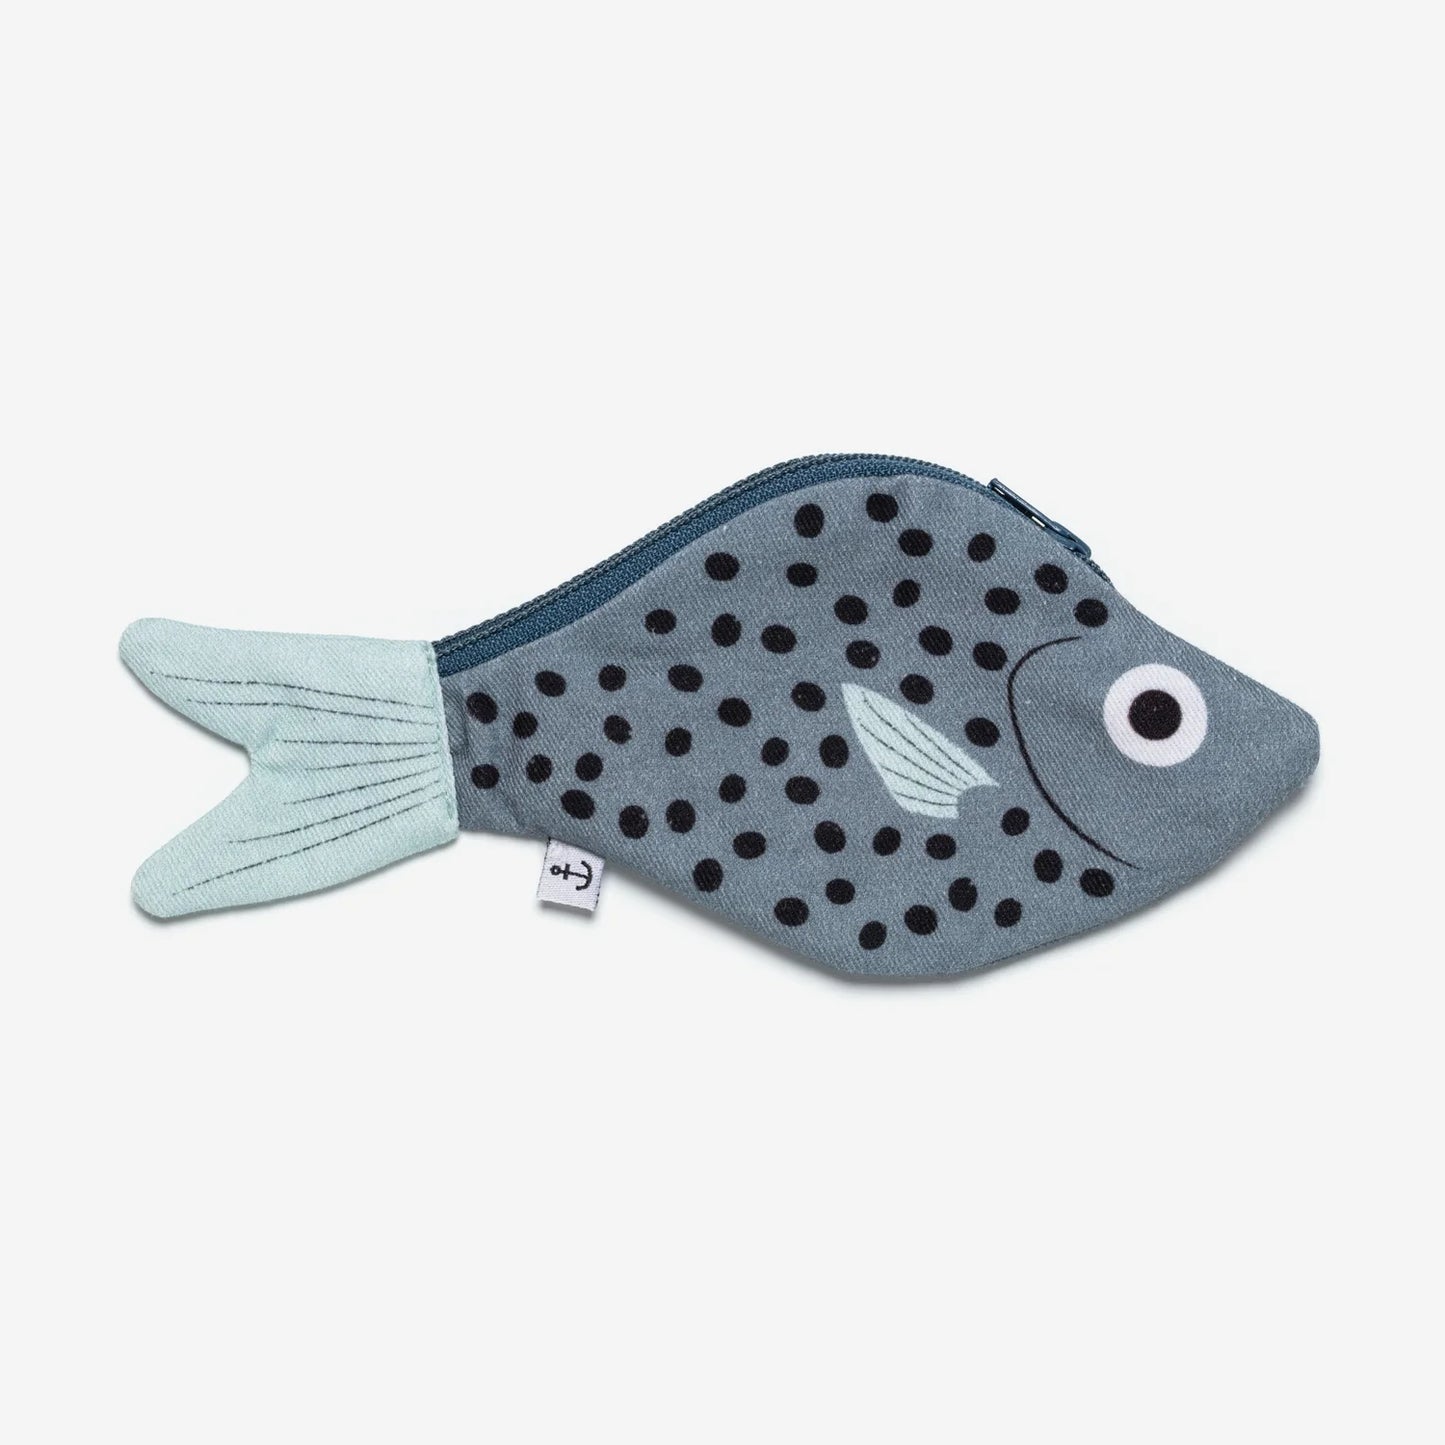 Blue, spotted Bream fish zippered pouch 